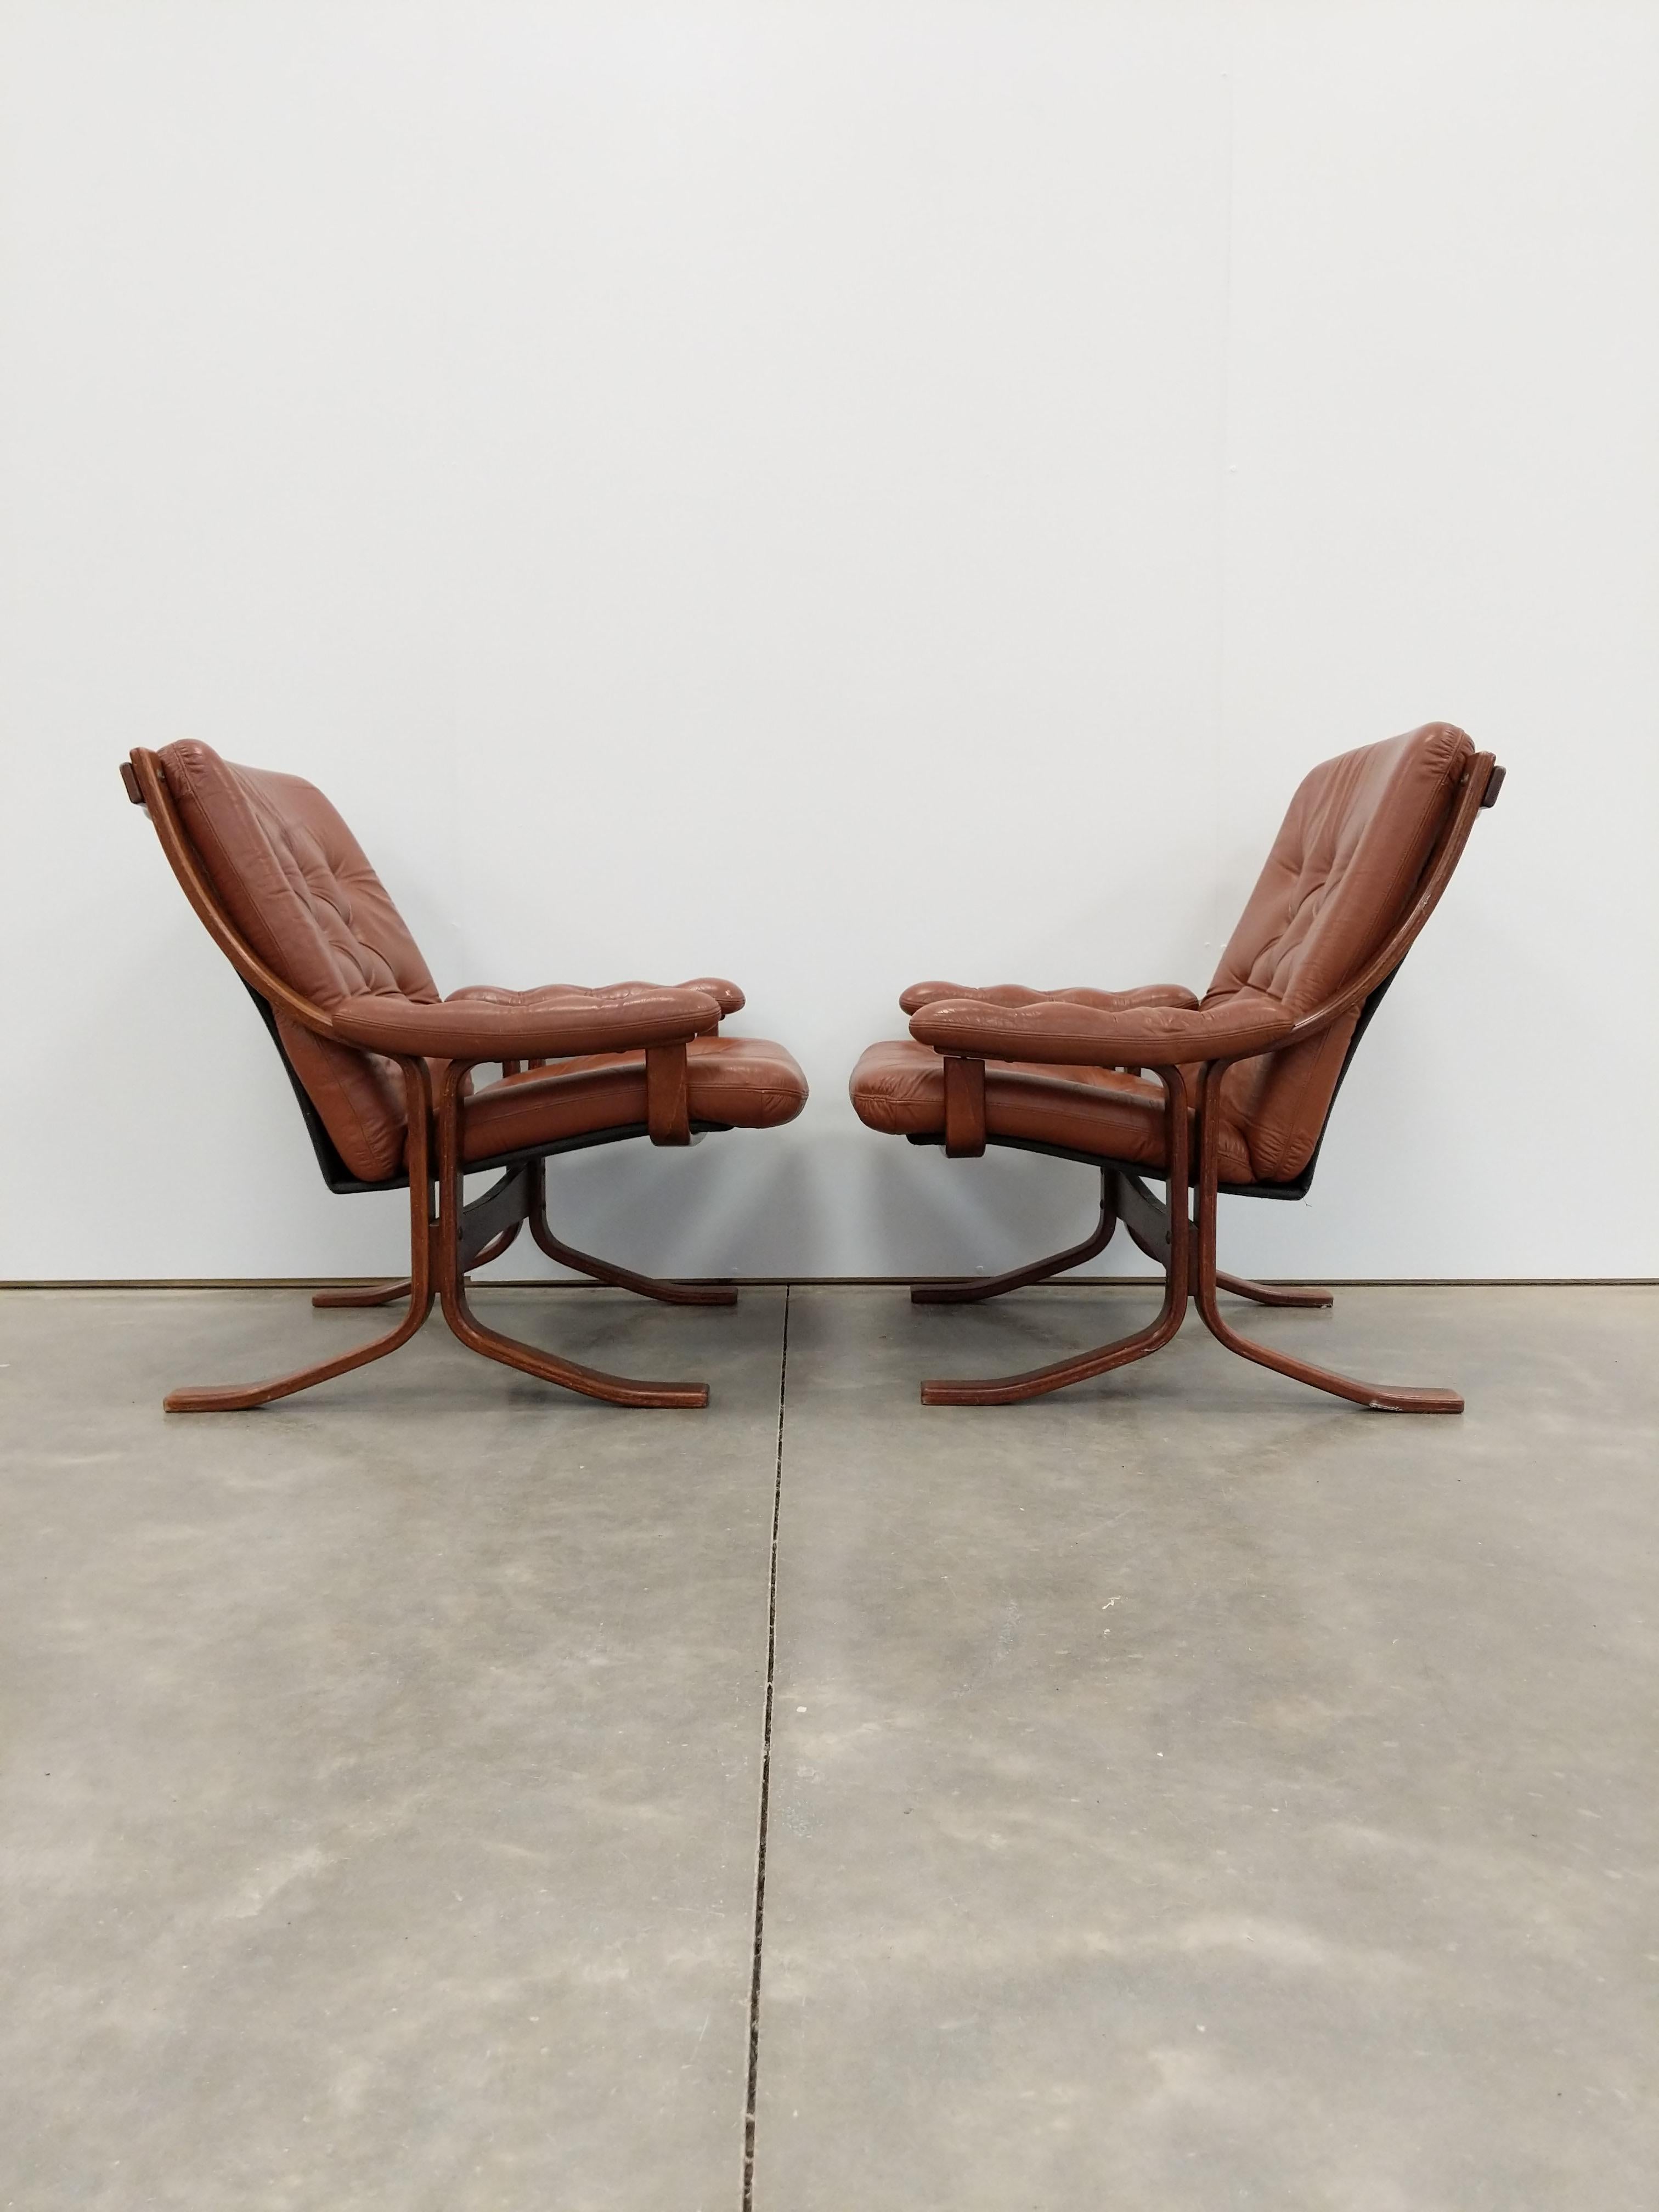 Pair of authentic vintage mid century Norwegian / Scandinavian Modern leather lounge chairs.

Designed by Jon Hjortdal for Velledalen Møbler.

This set is in excellent vintage condition with few signs of age-related wear (see photos).

If you would